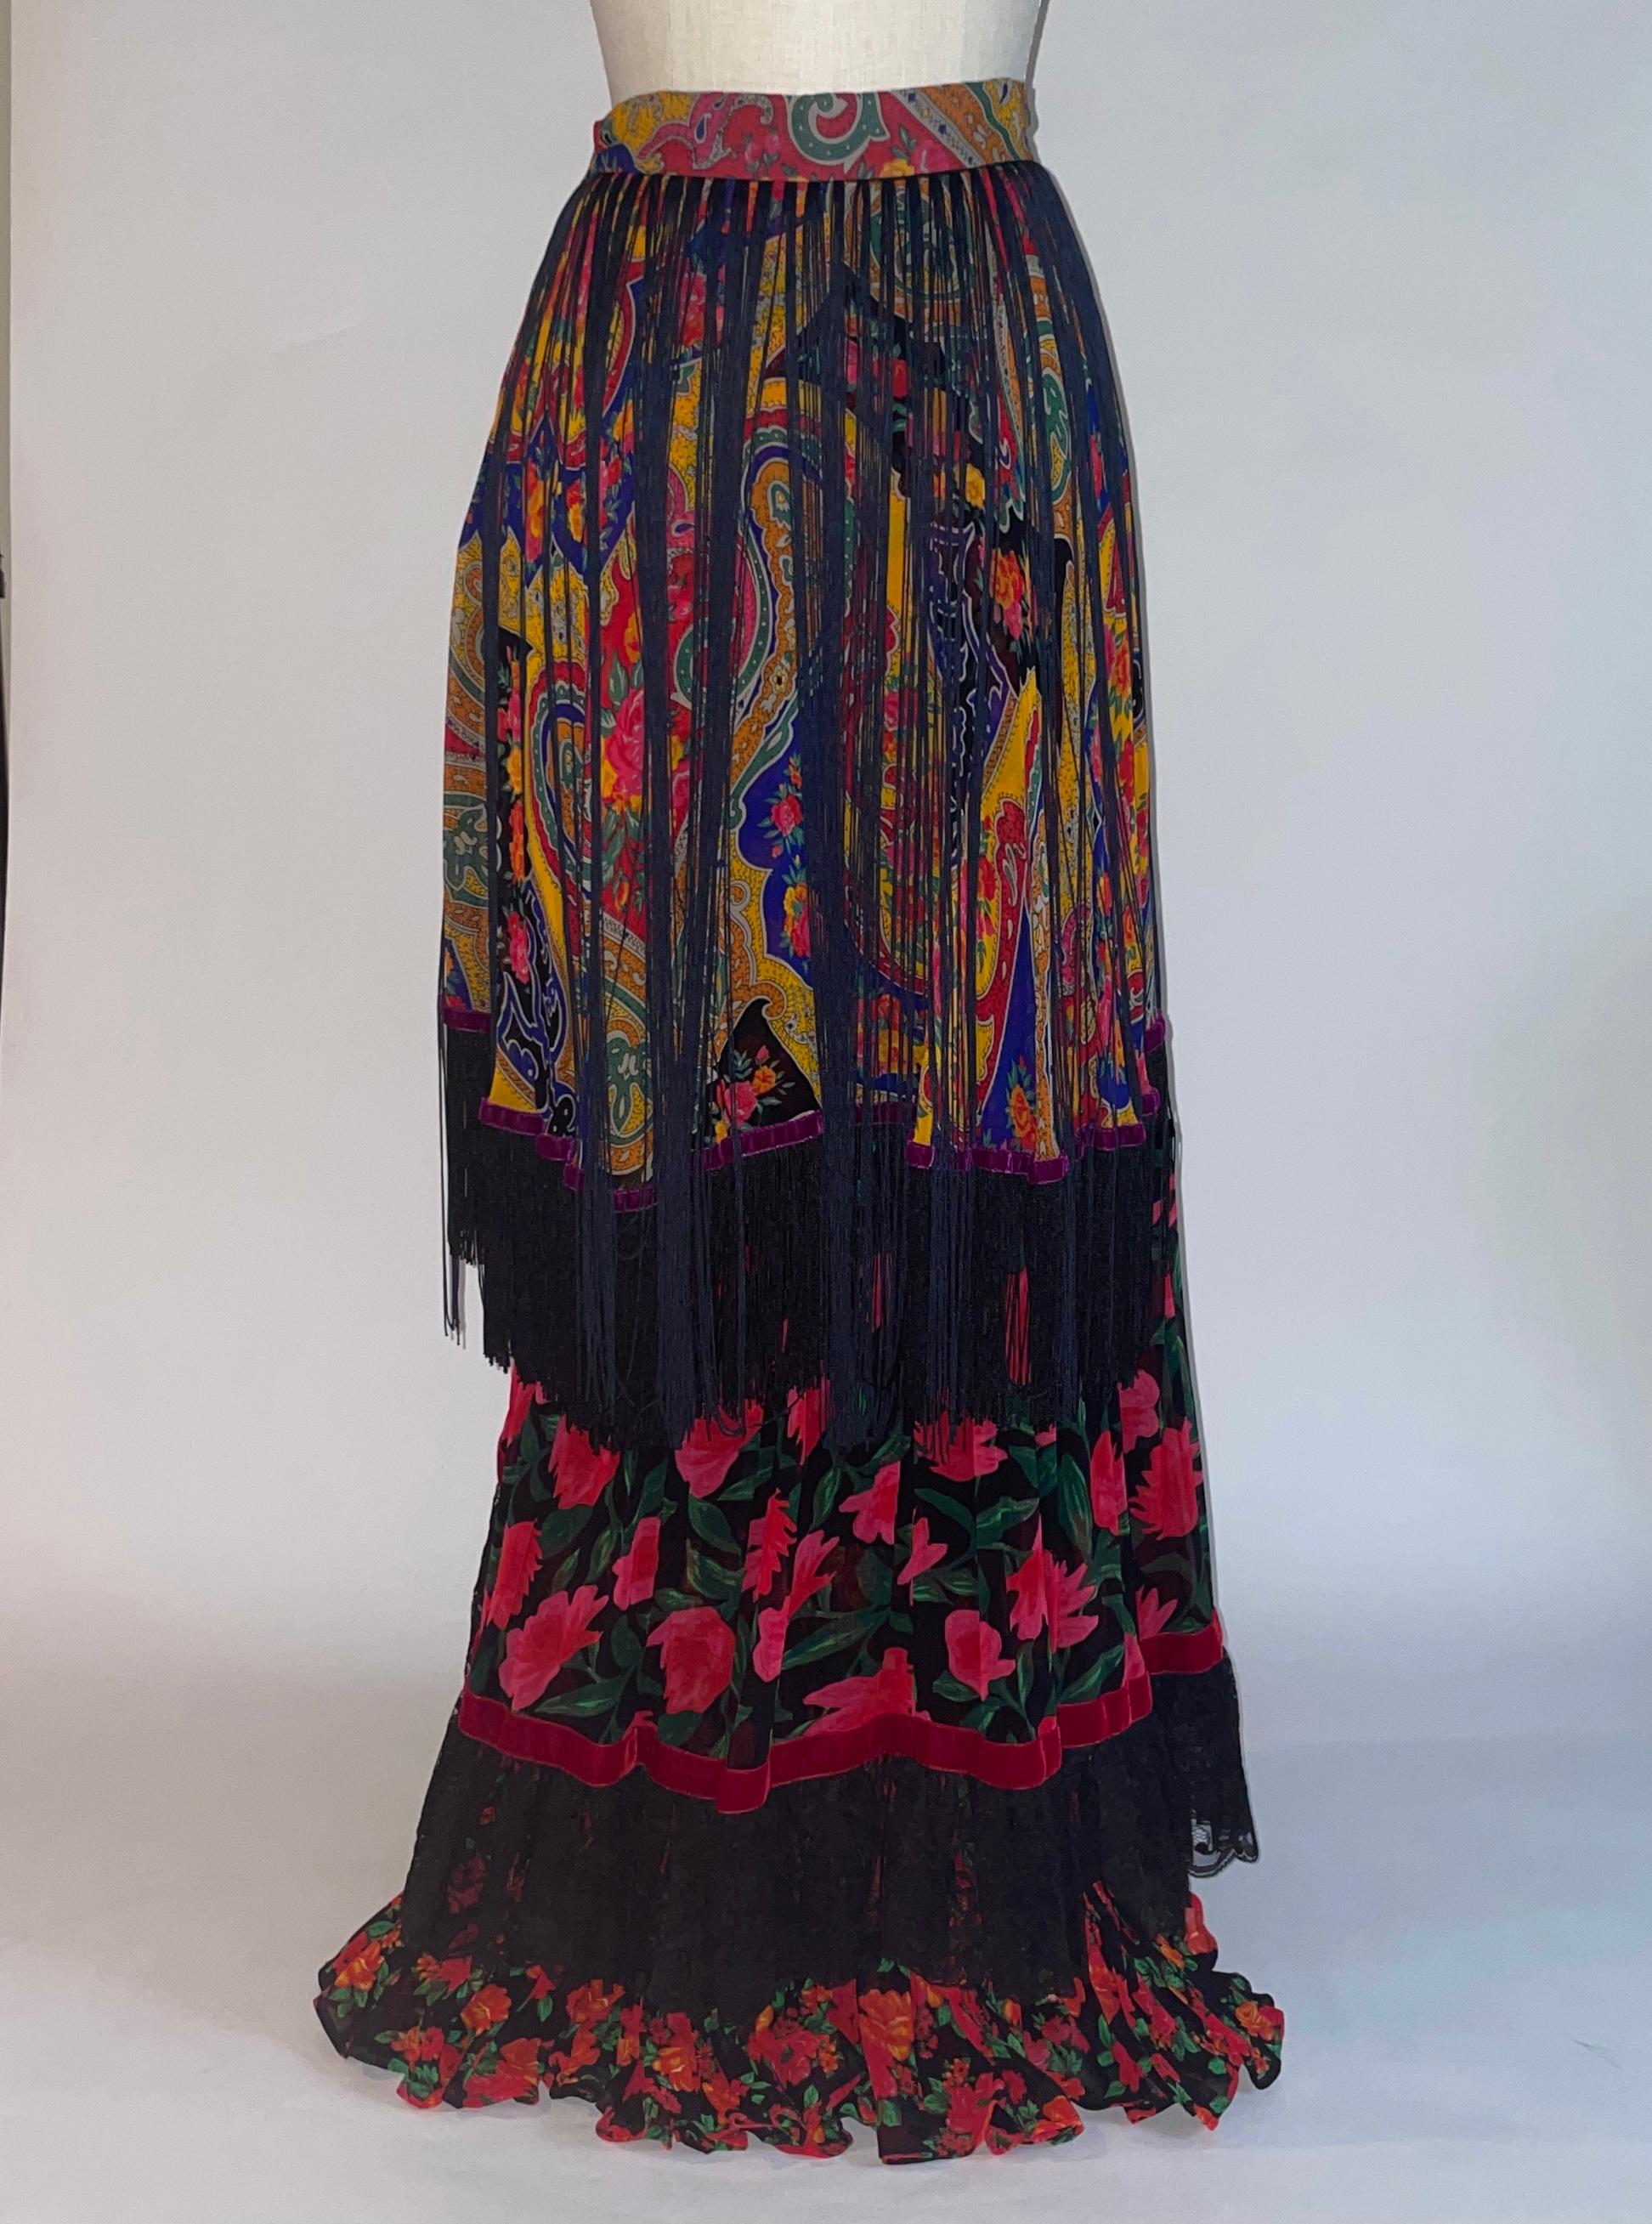 Women's 1990s Dolce and Gabbana Tiered Floral Fringe Skirt in Black Red and Yellow For Sale